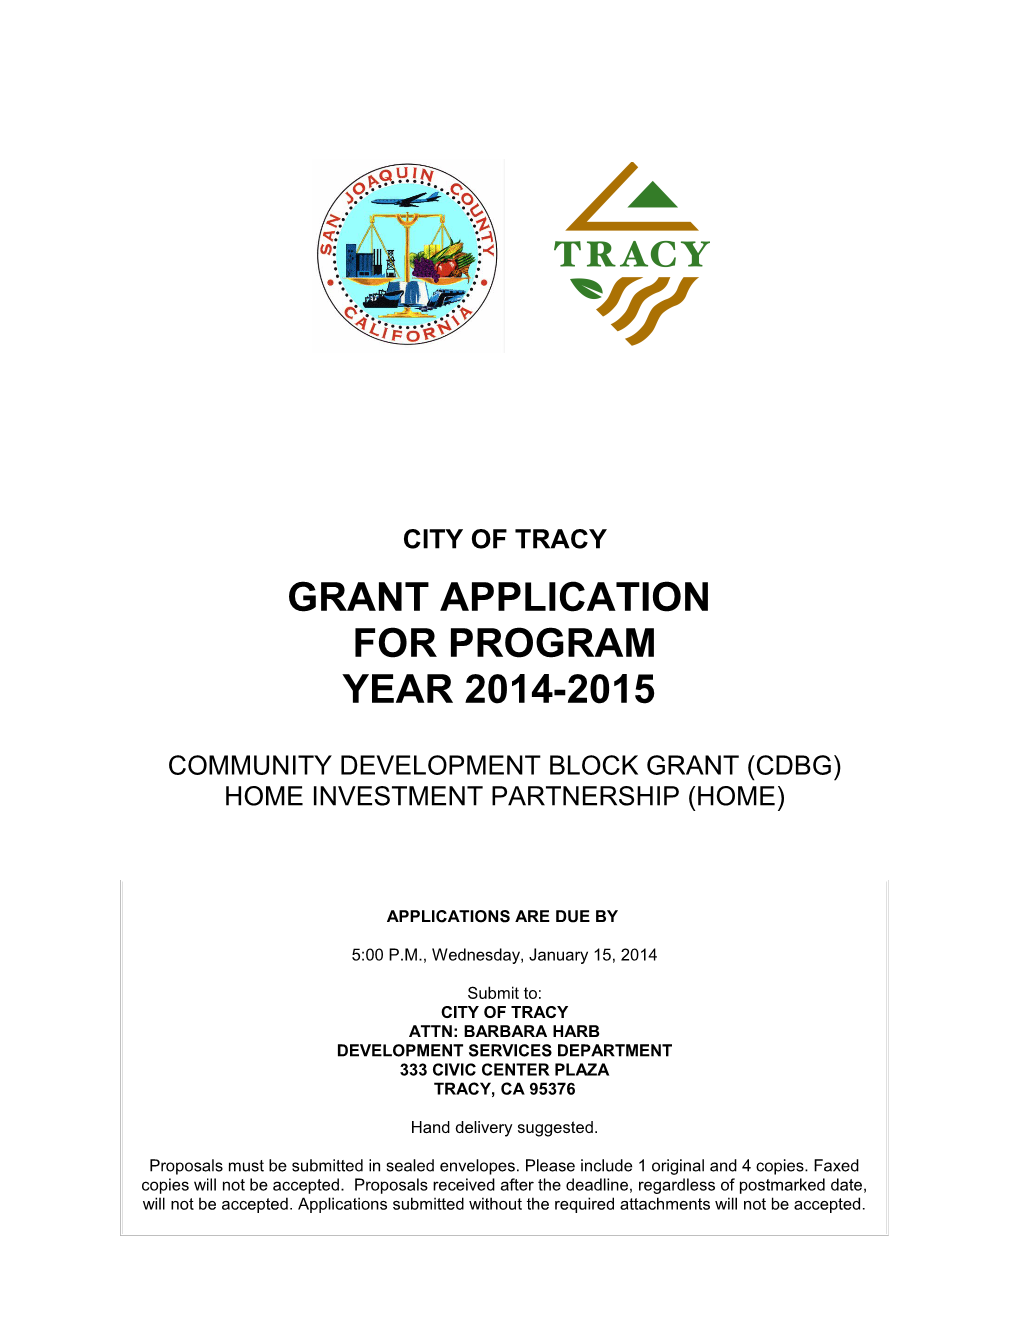 City of Tracy Grant Application for Program Year 2014-2015 1